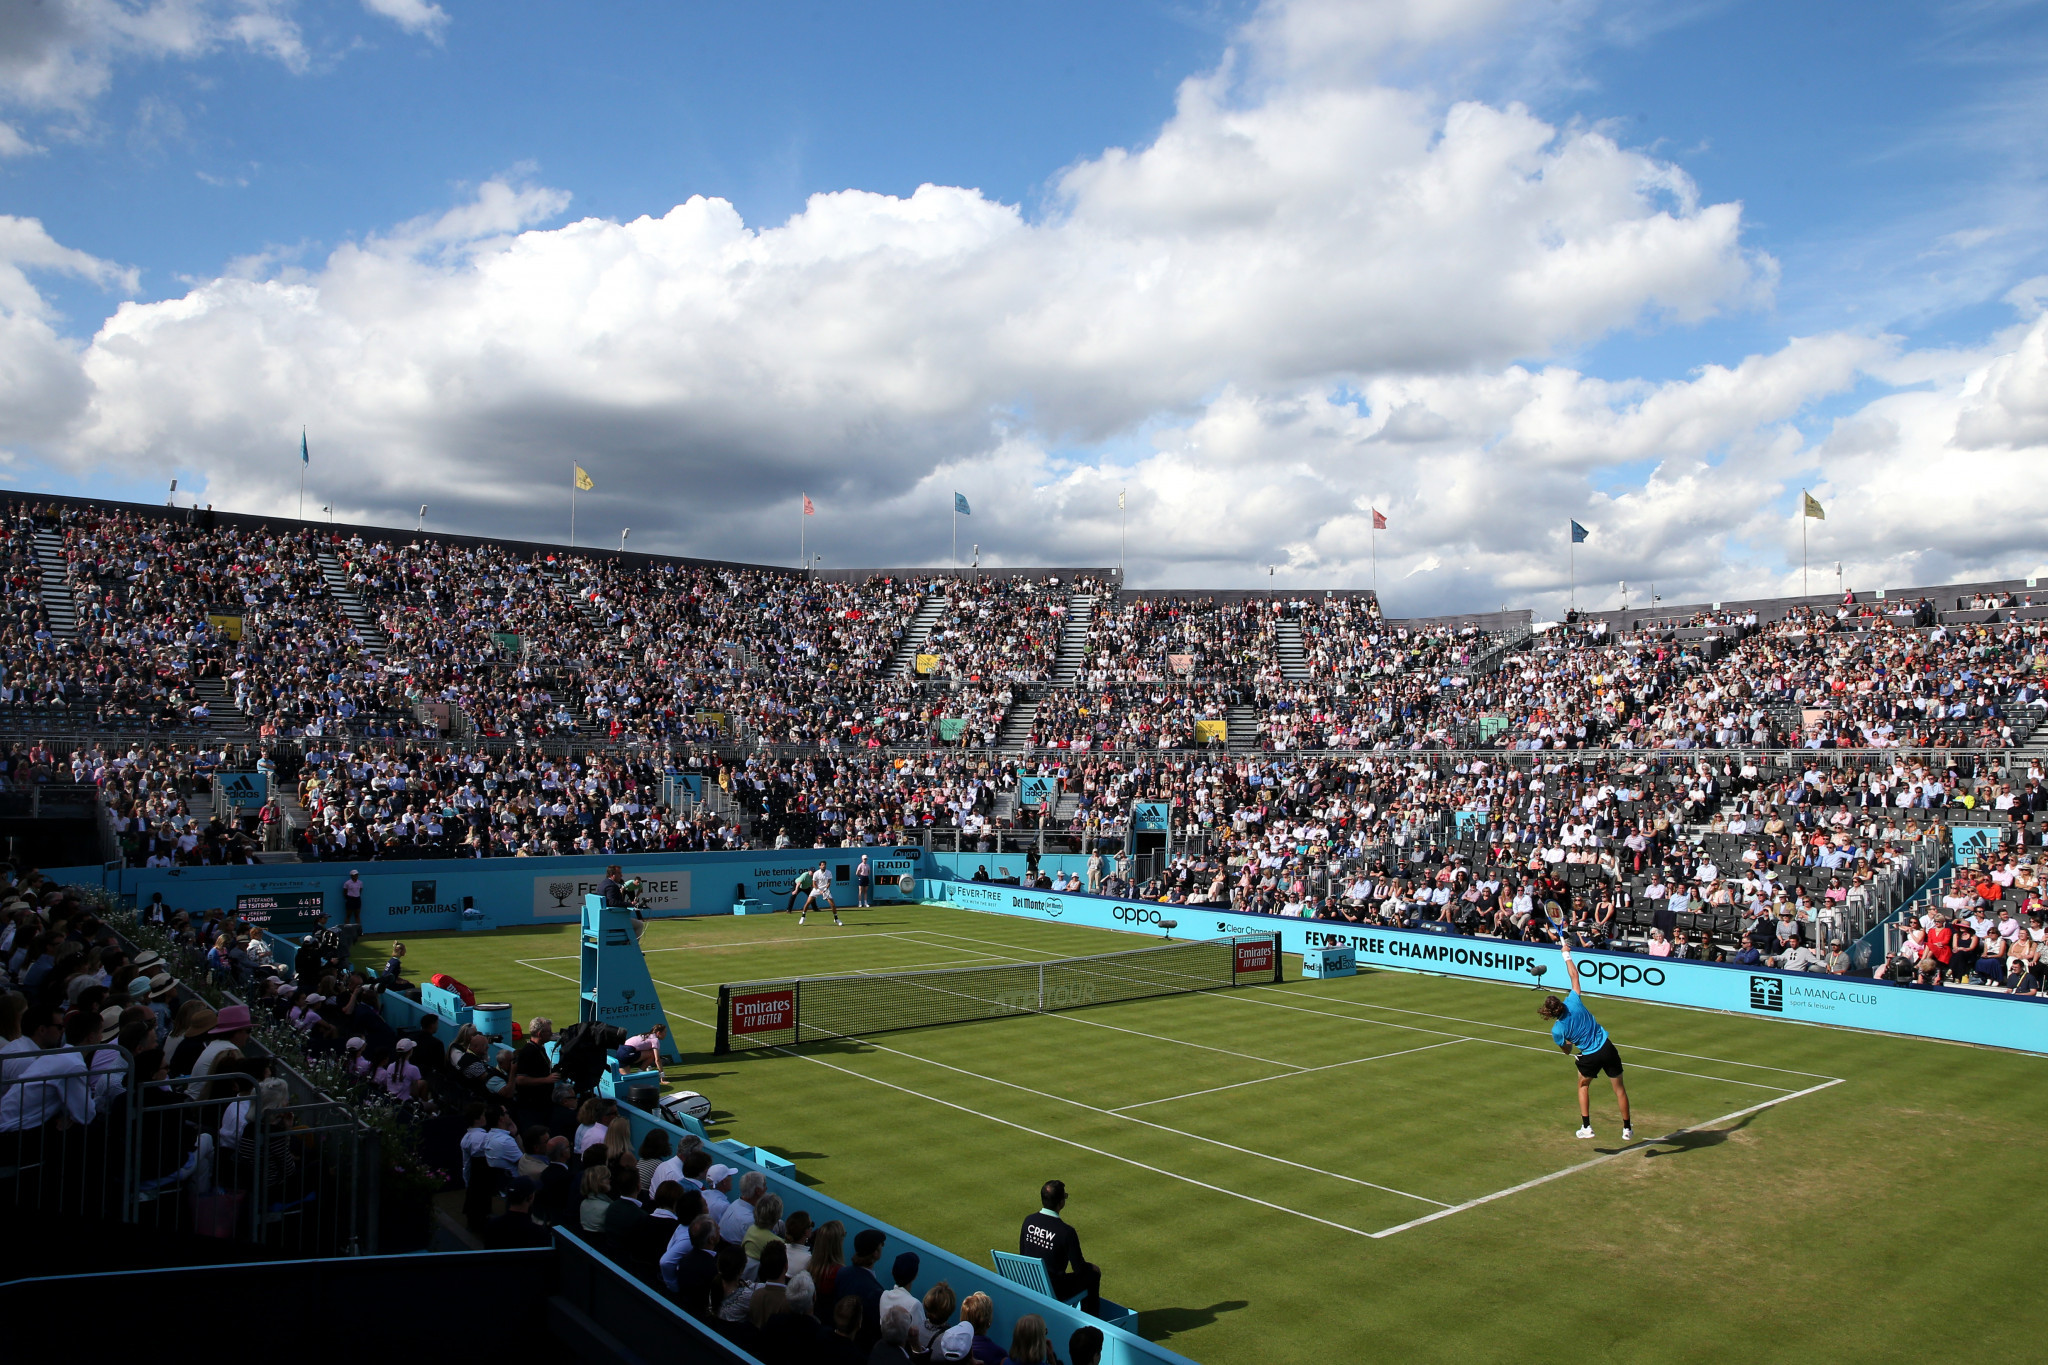 Ranking points due to remain at Queen's and Eastbourne International